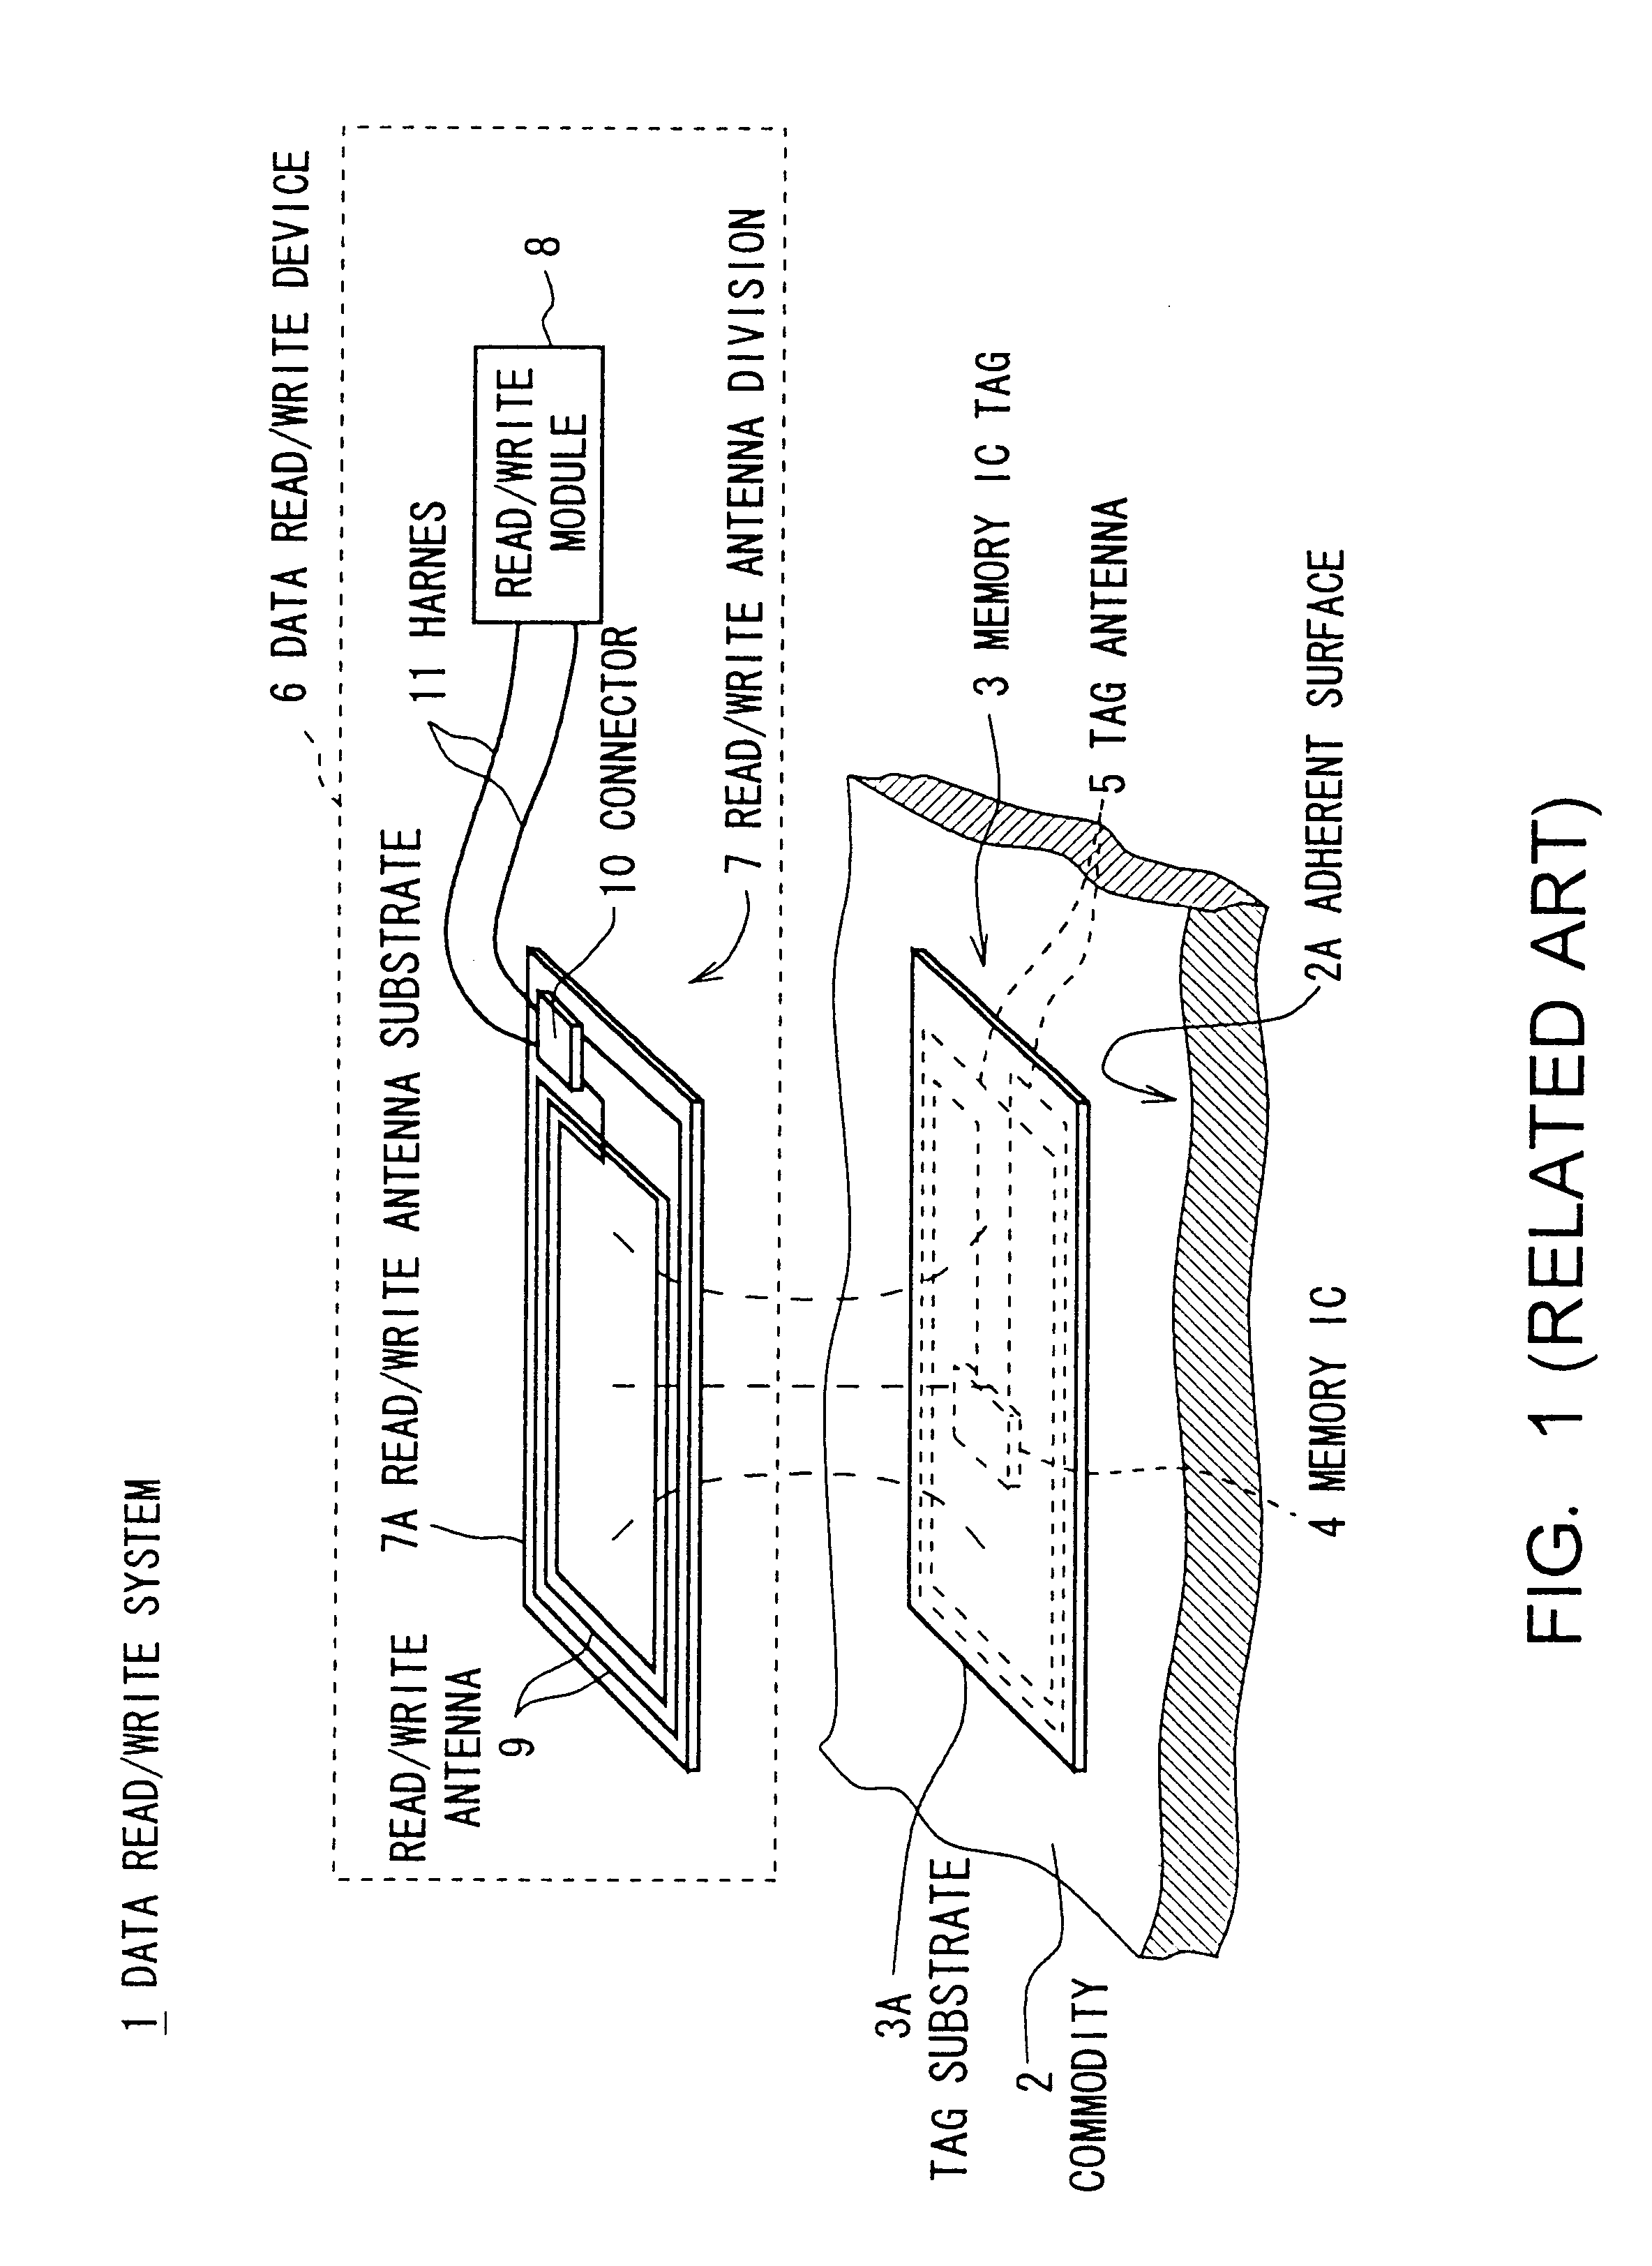 Non-contacting-type information storing device